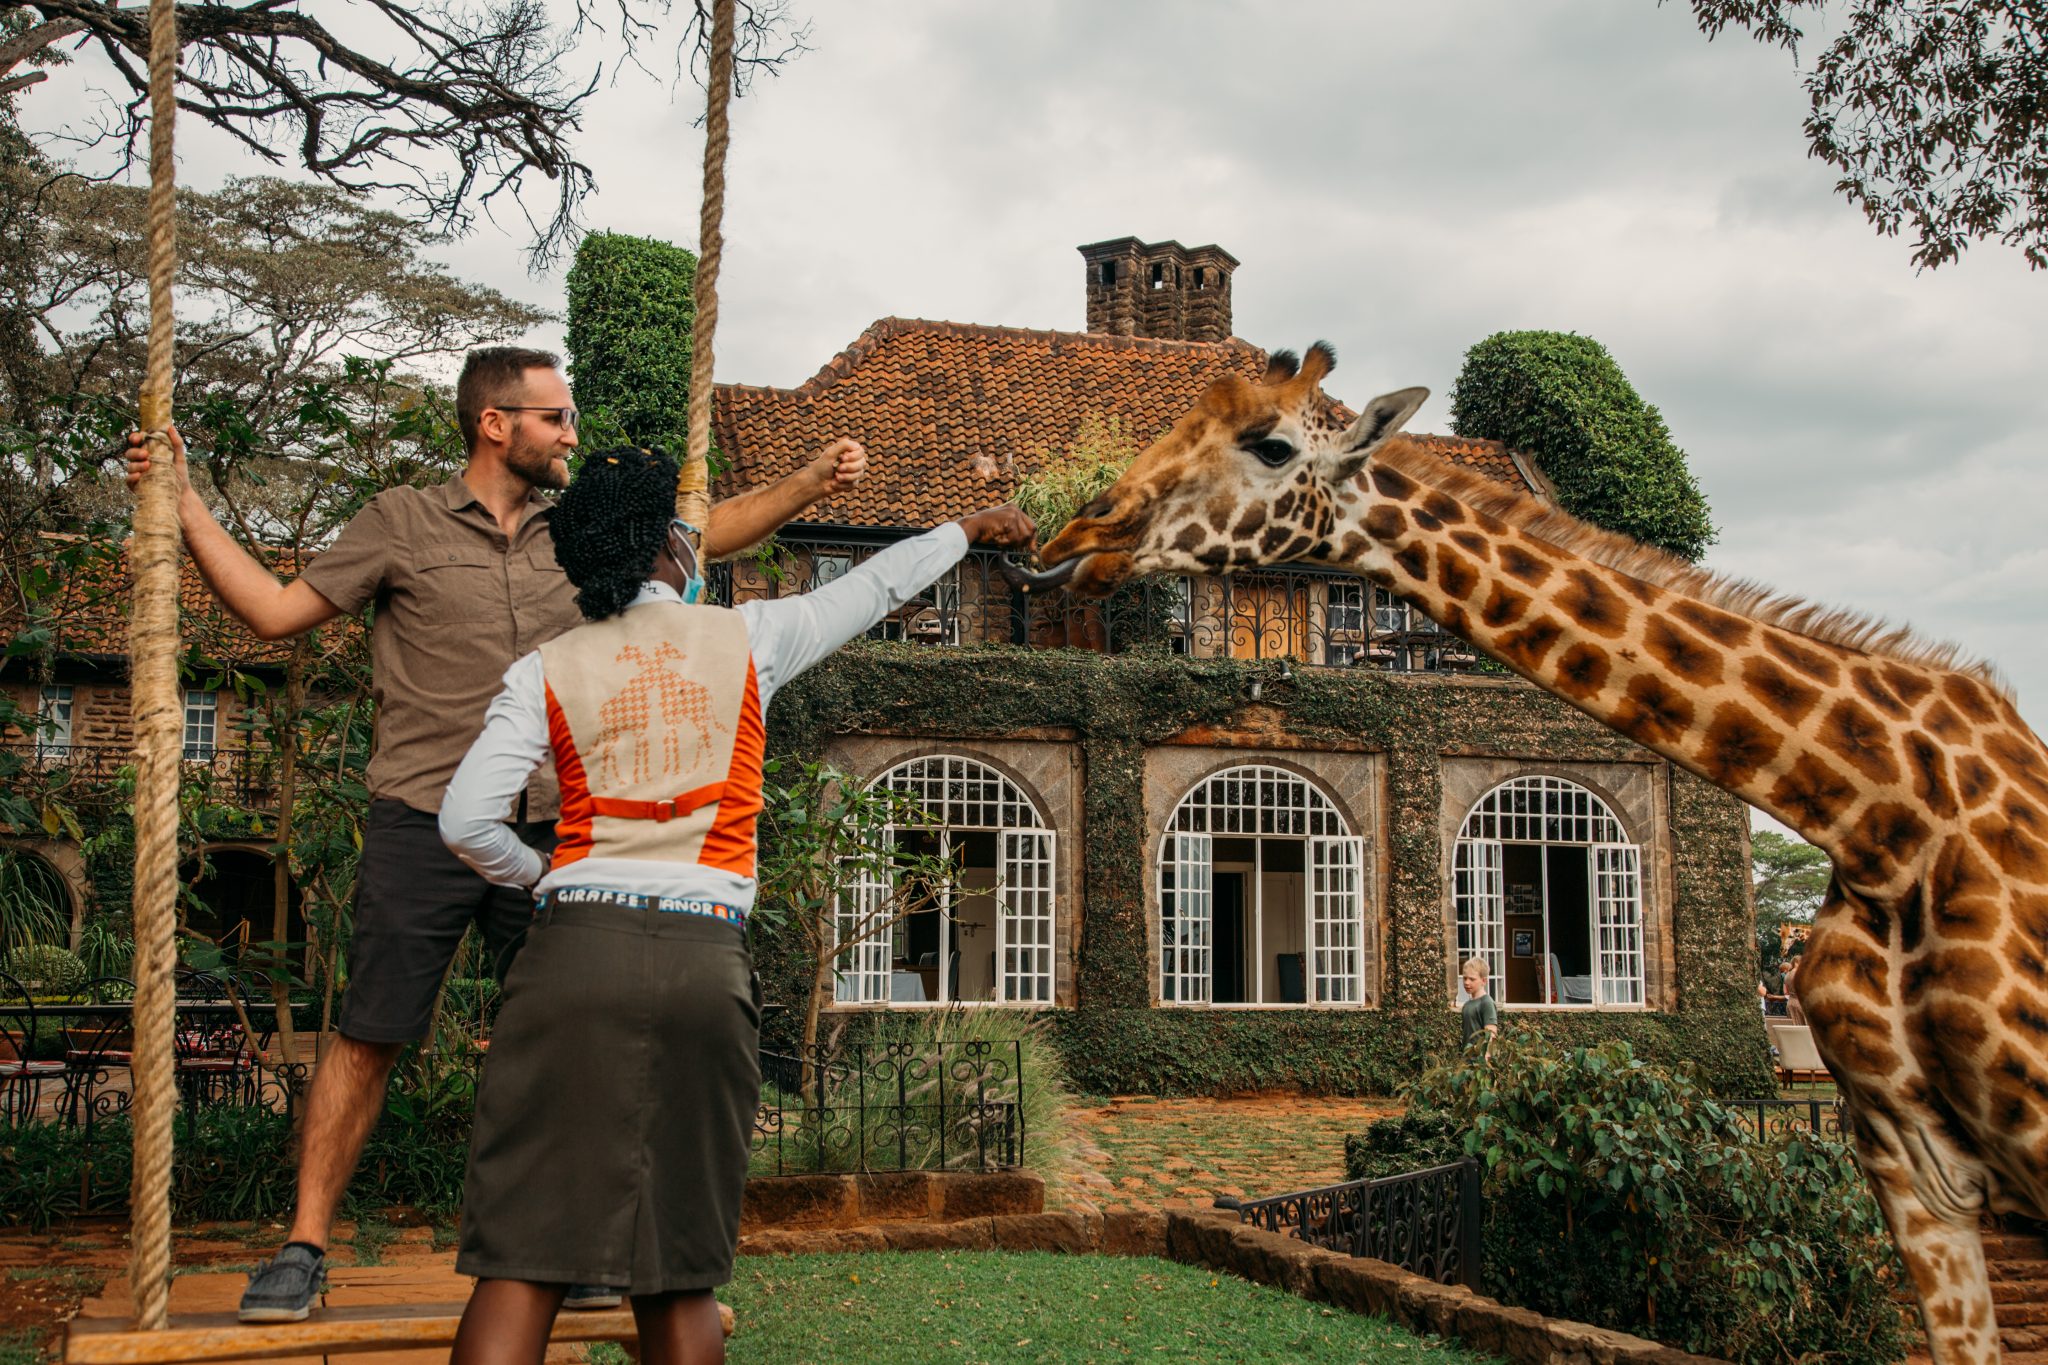 A man feeding a giraffe in front of Giraffe Manor and being guided by the staff.